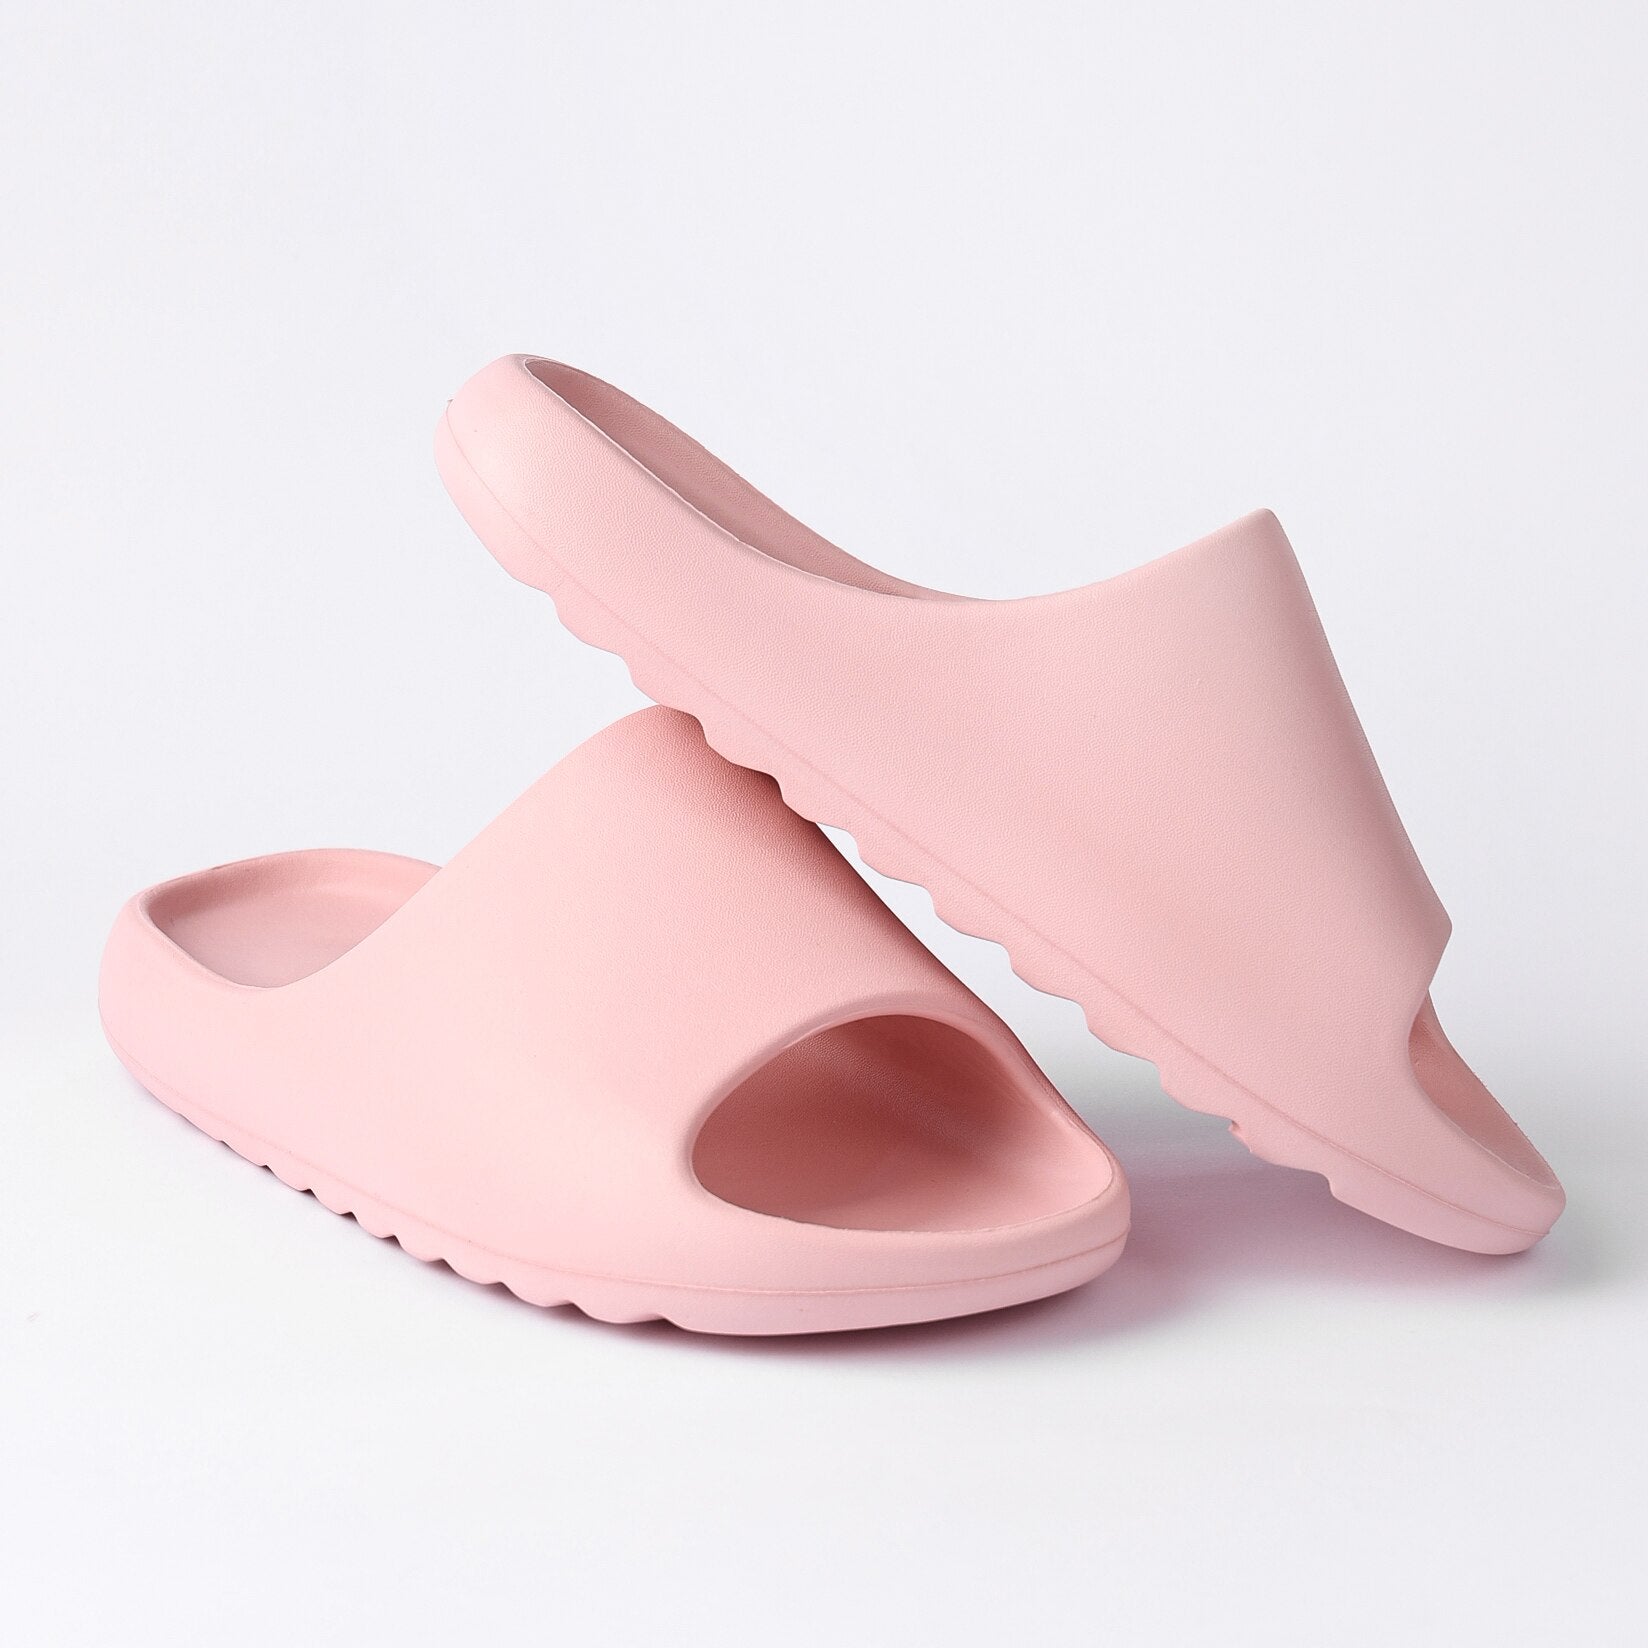 Cloud Pillow Slippers for Women - Pink Girl Slides,Shower Shoes for Co -  Kelequi Zapatería